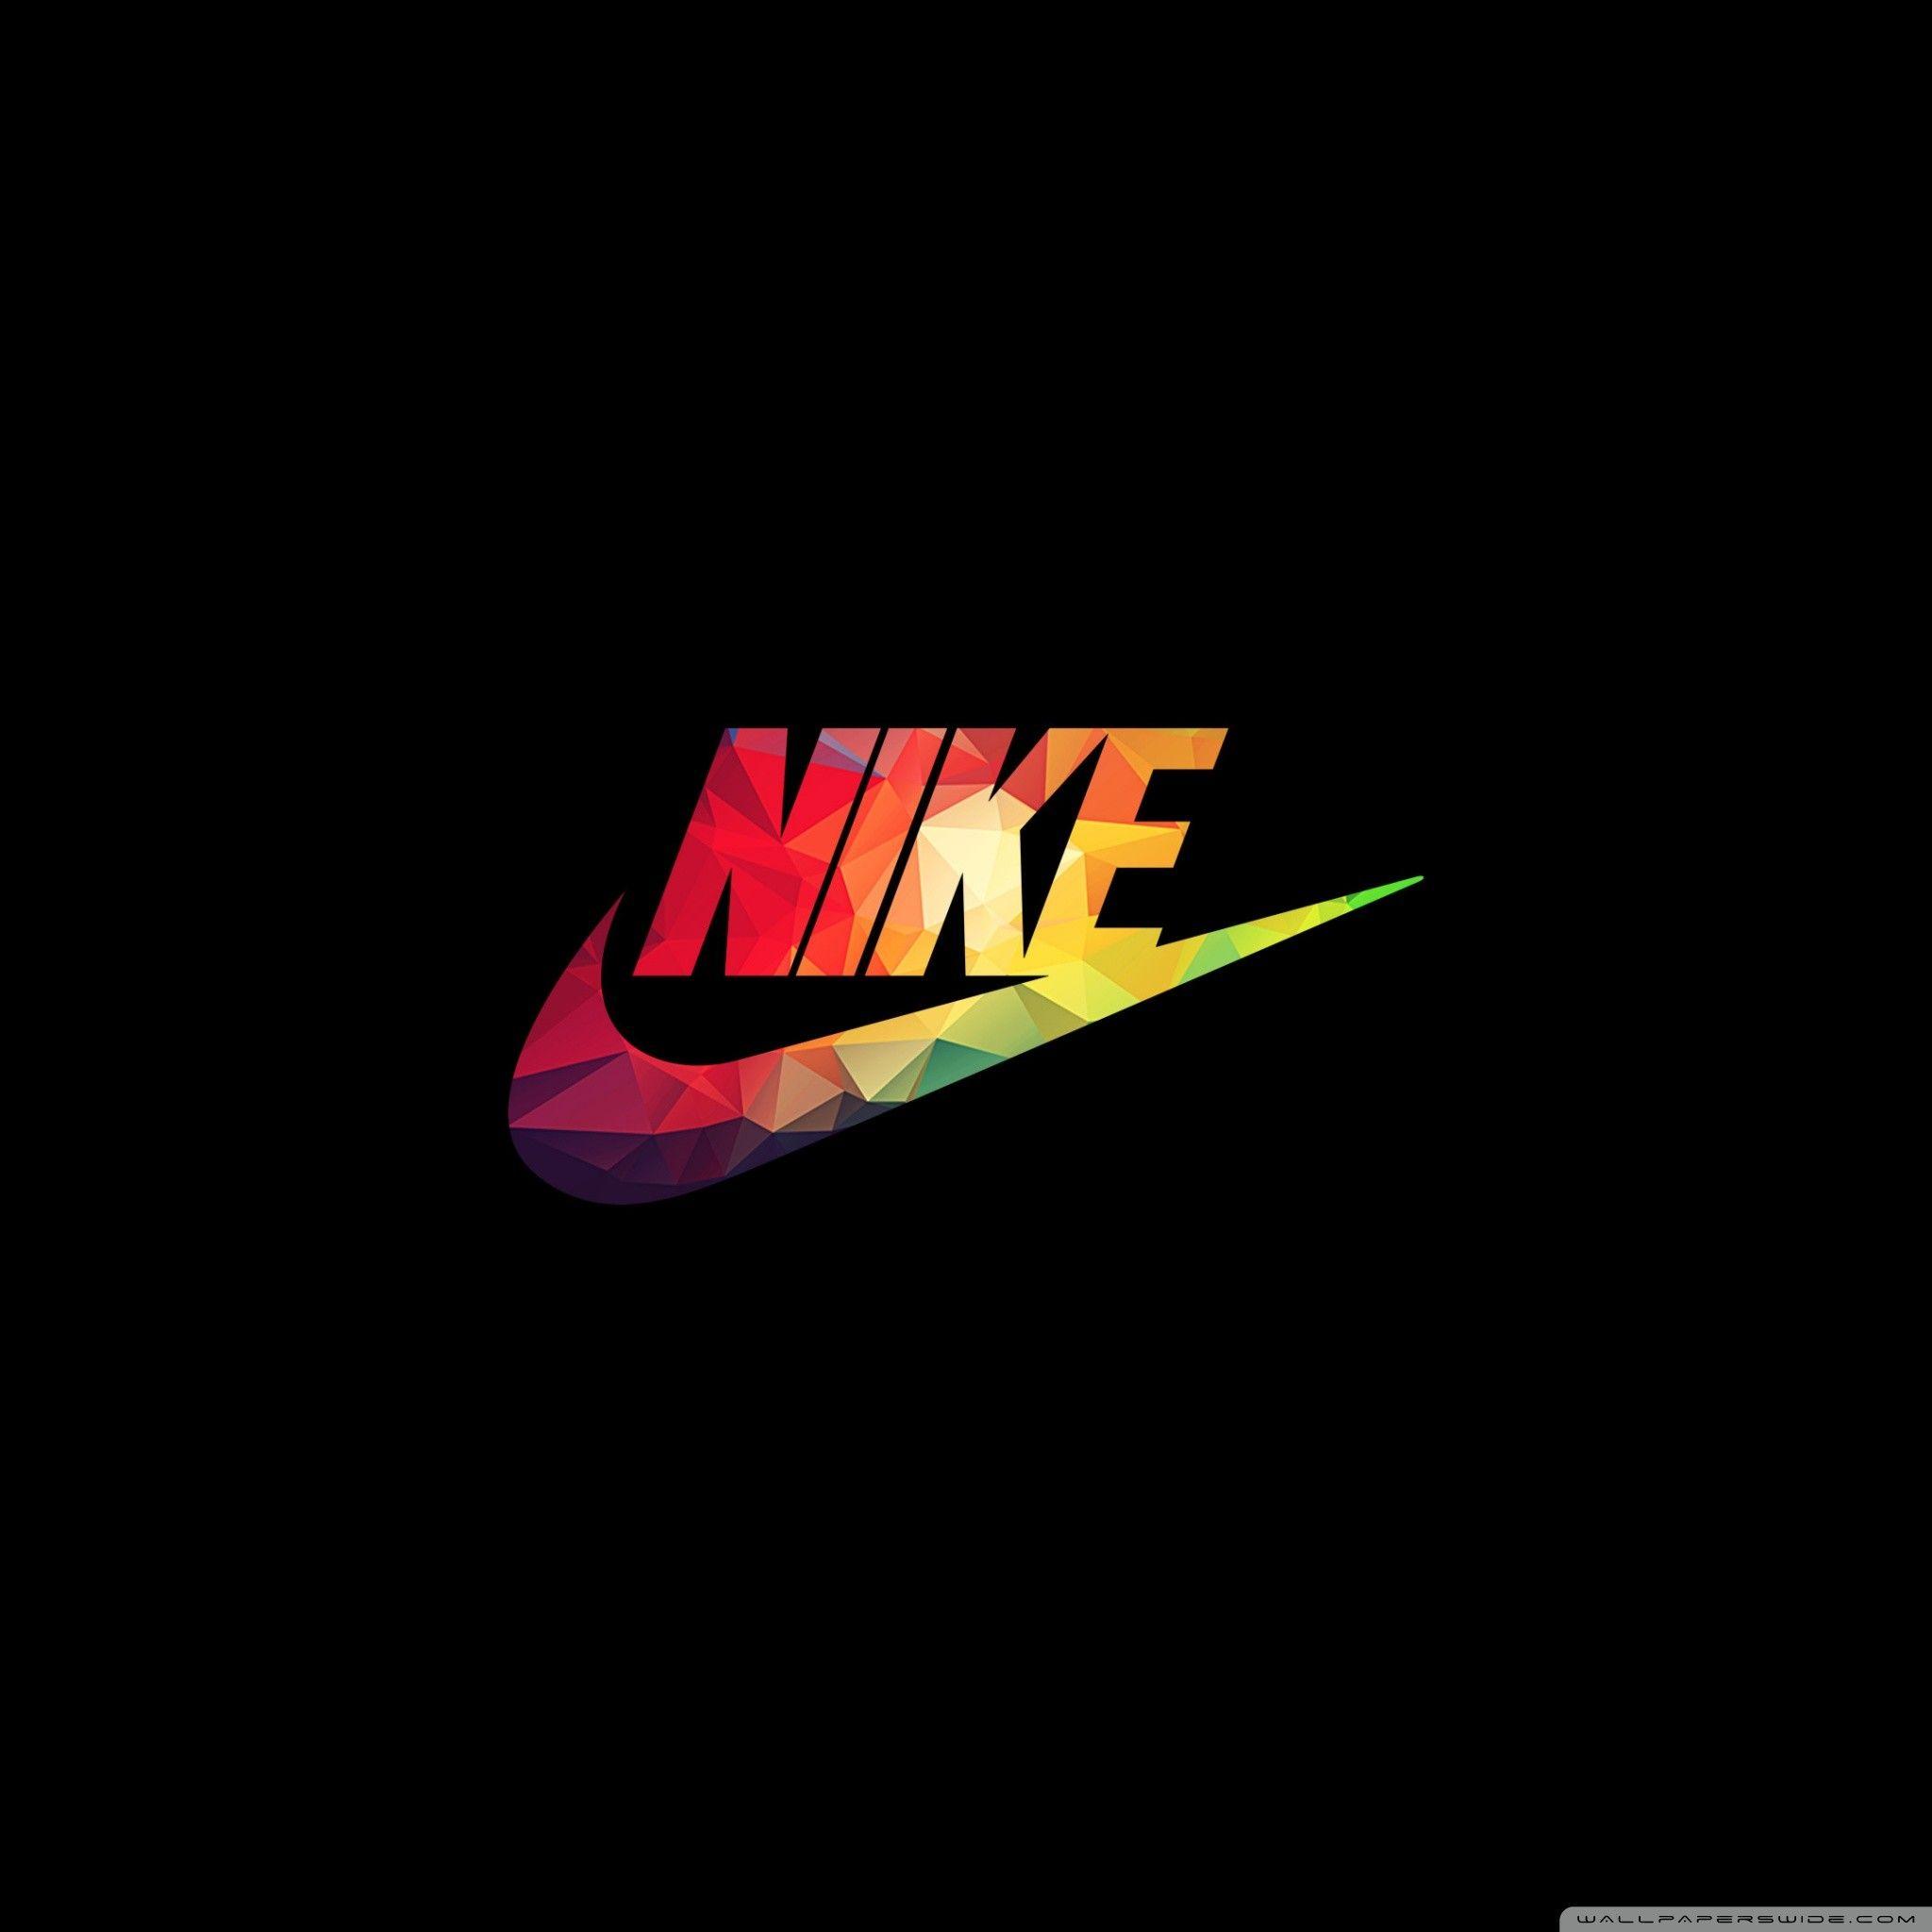 75 Nike for iPhone  Android iPhone Desktop HD Backgrounds  Wallpapers  1080p 4k